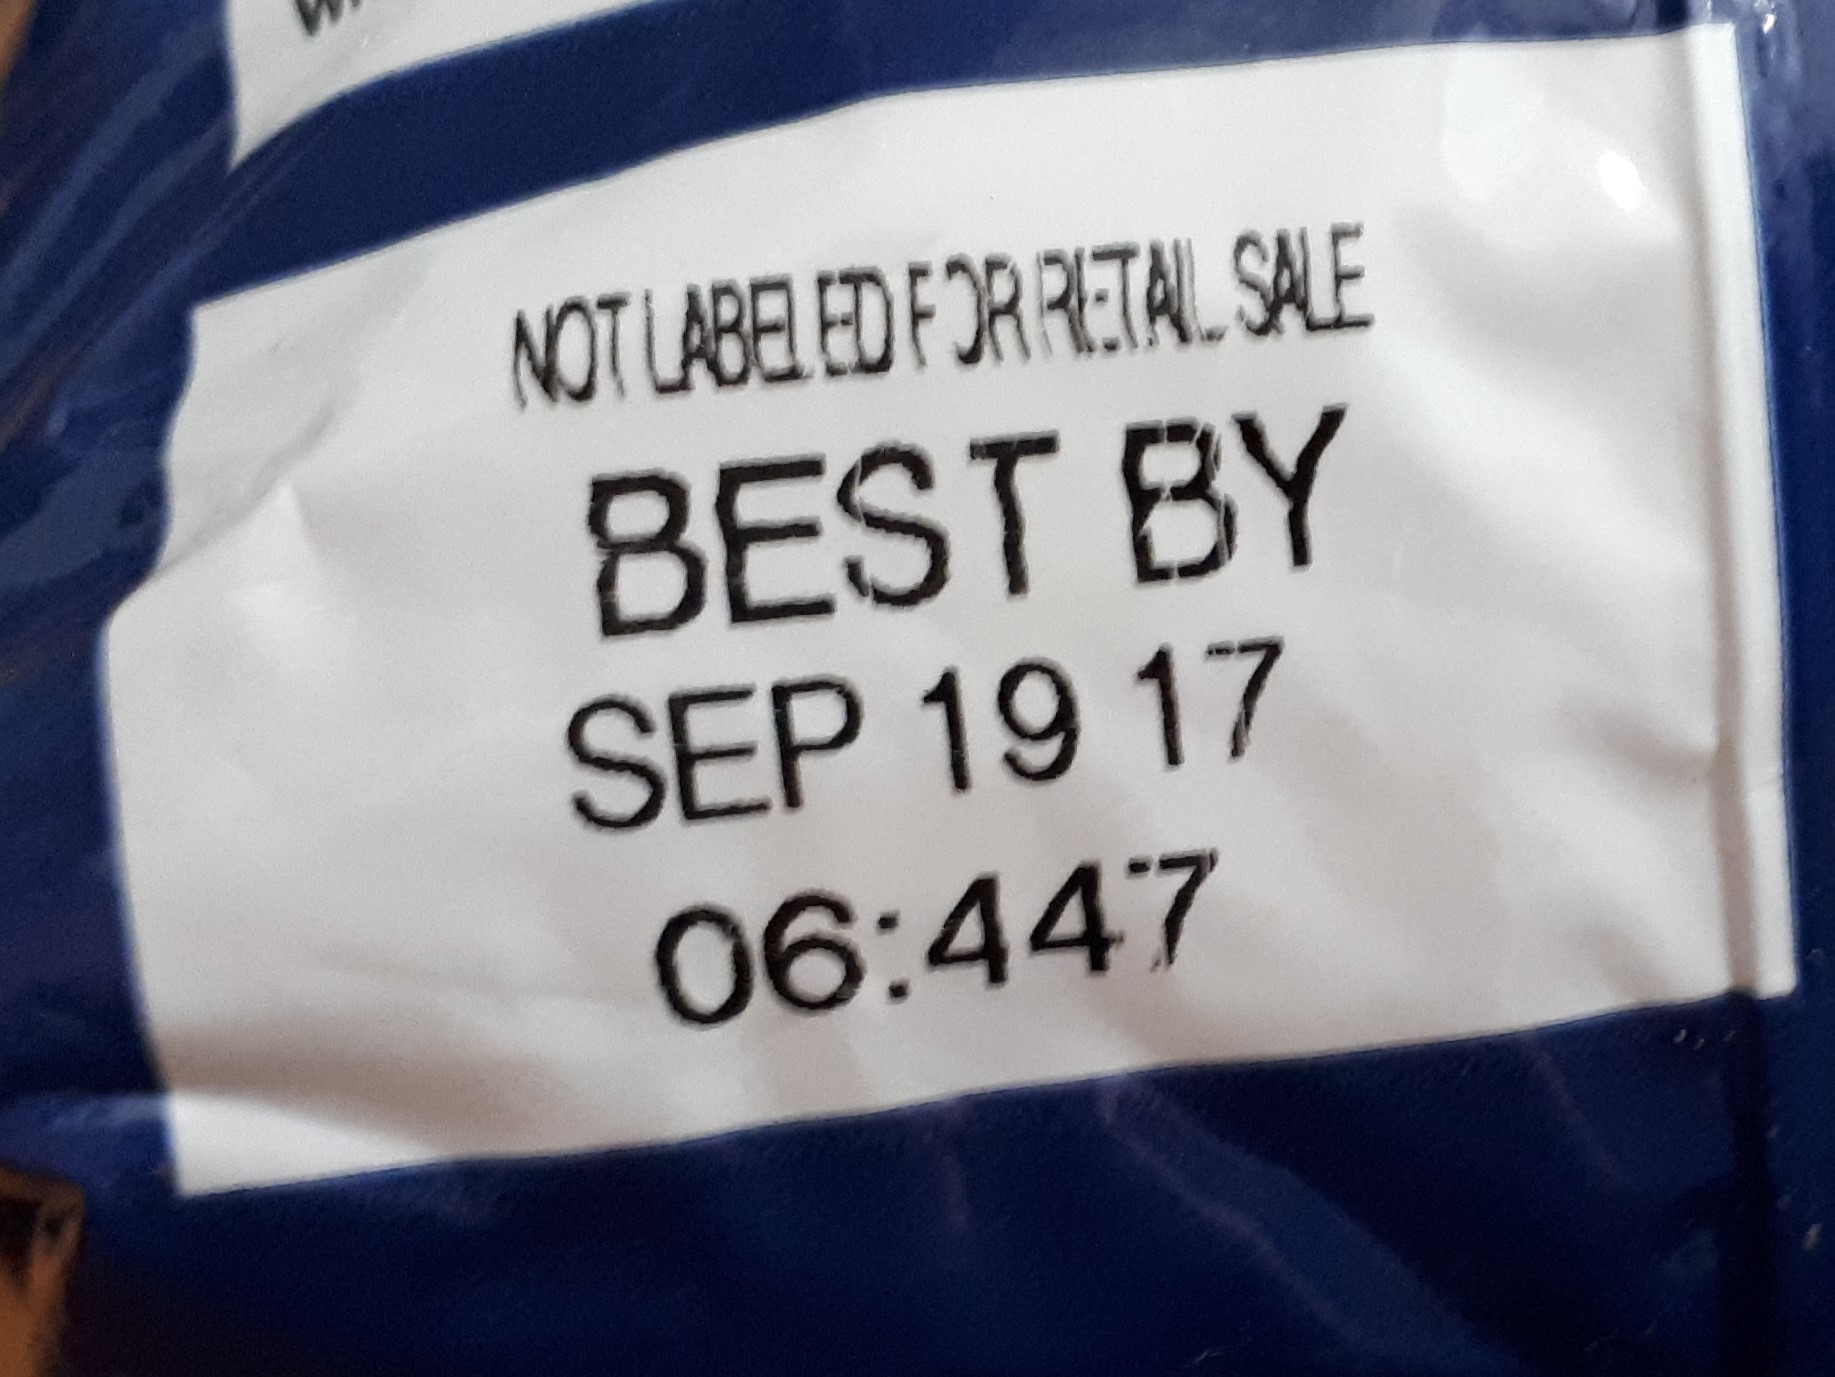 Best-before date that appears to be Sep 1917